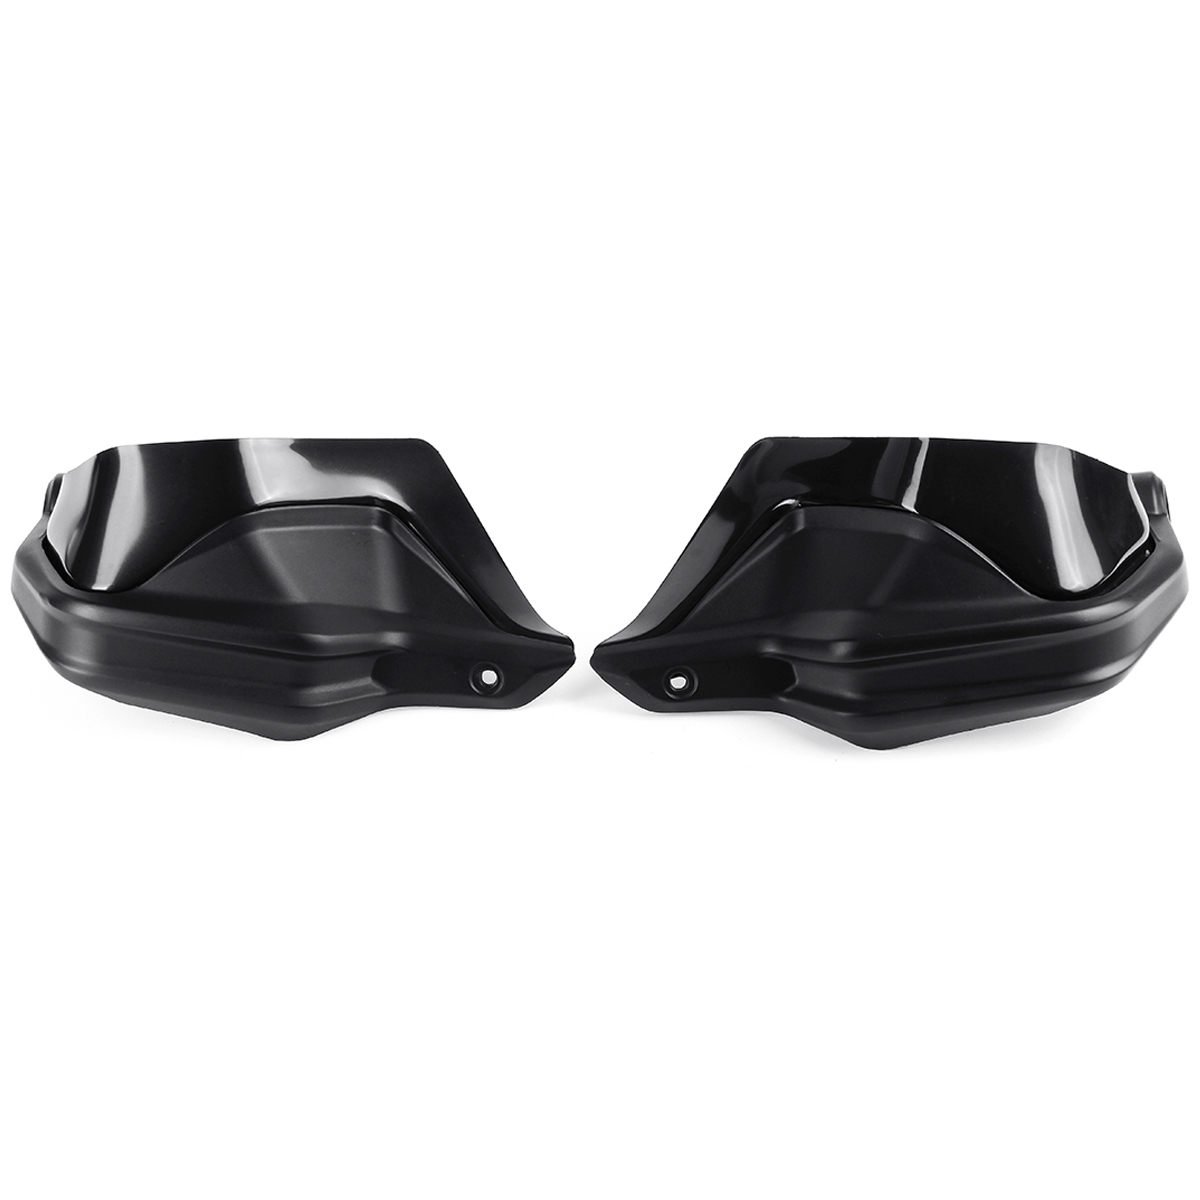 

Handlebar Handguard Extension Shield Protector For BMW R1200GS F800GS ADV Motorcycle